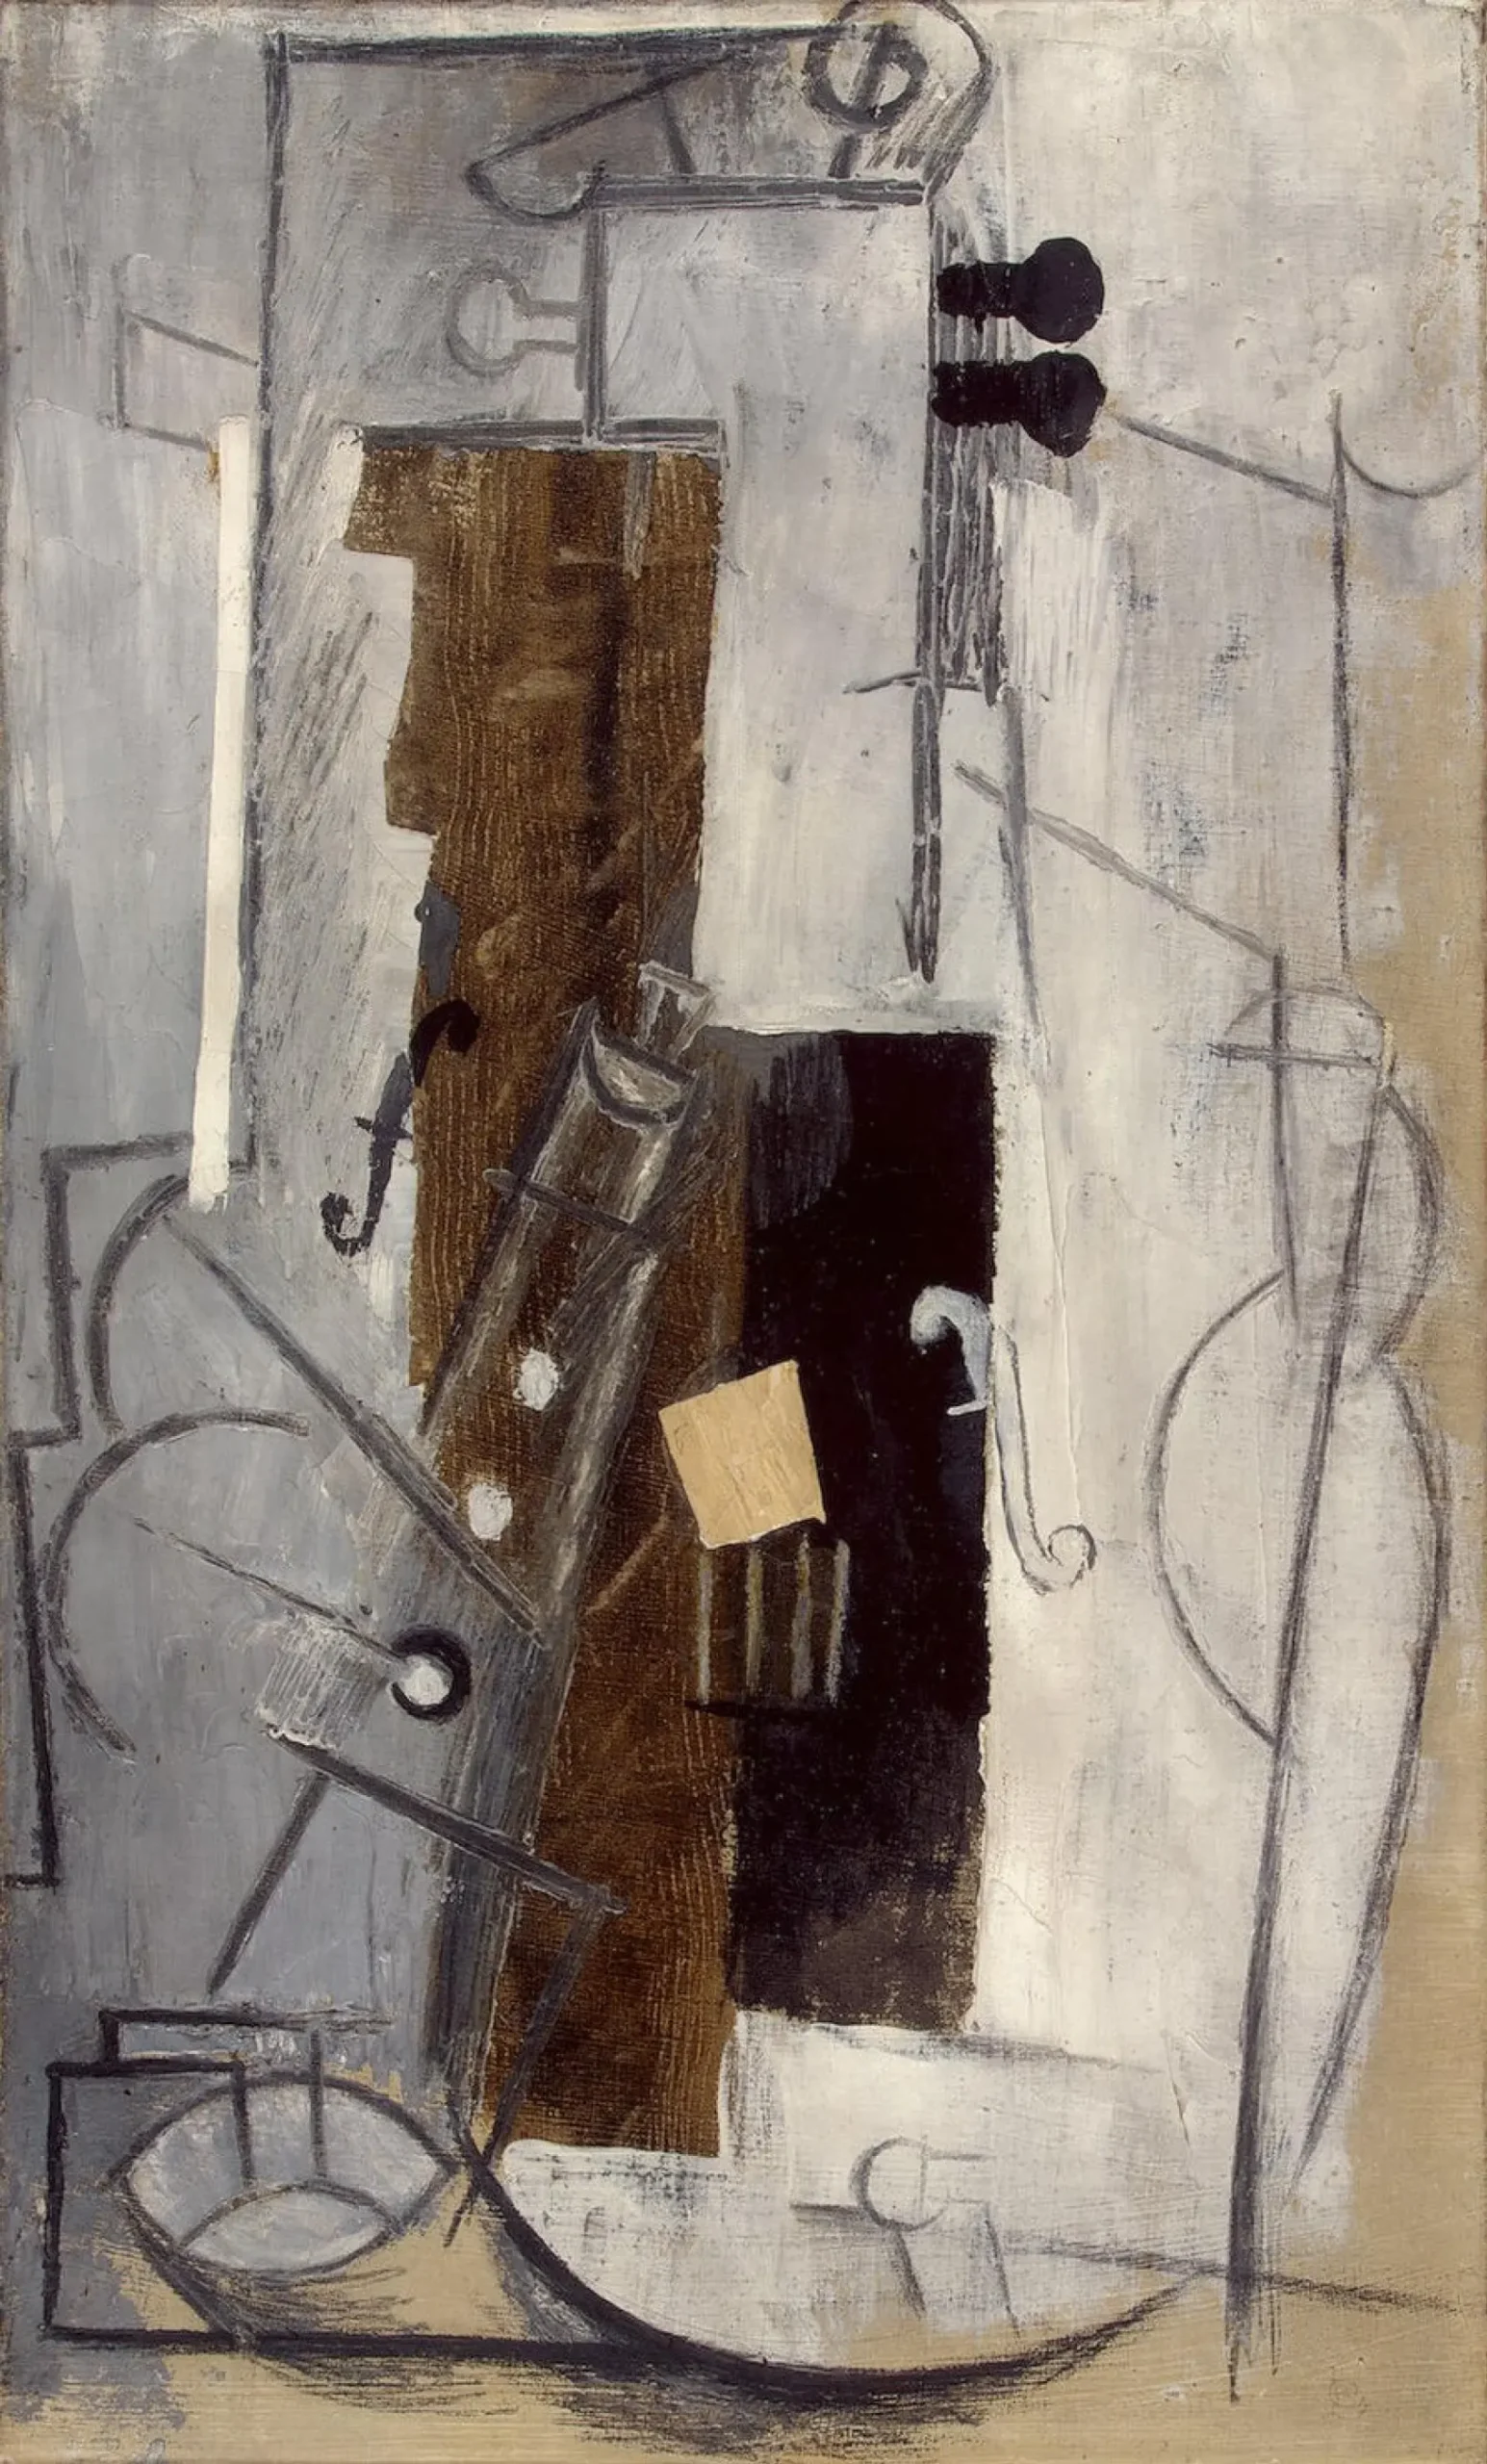 braque violin clarinet - Where is clarinet and bottle of rum on a mantelpiece